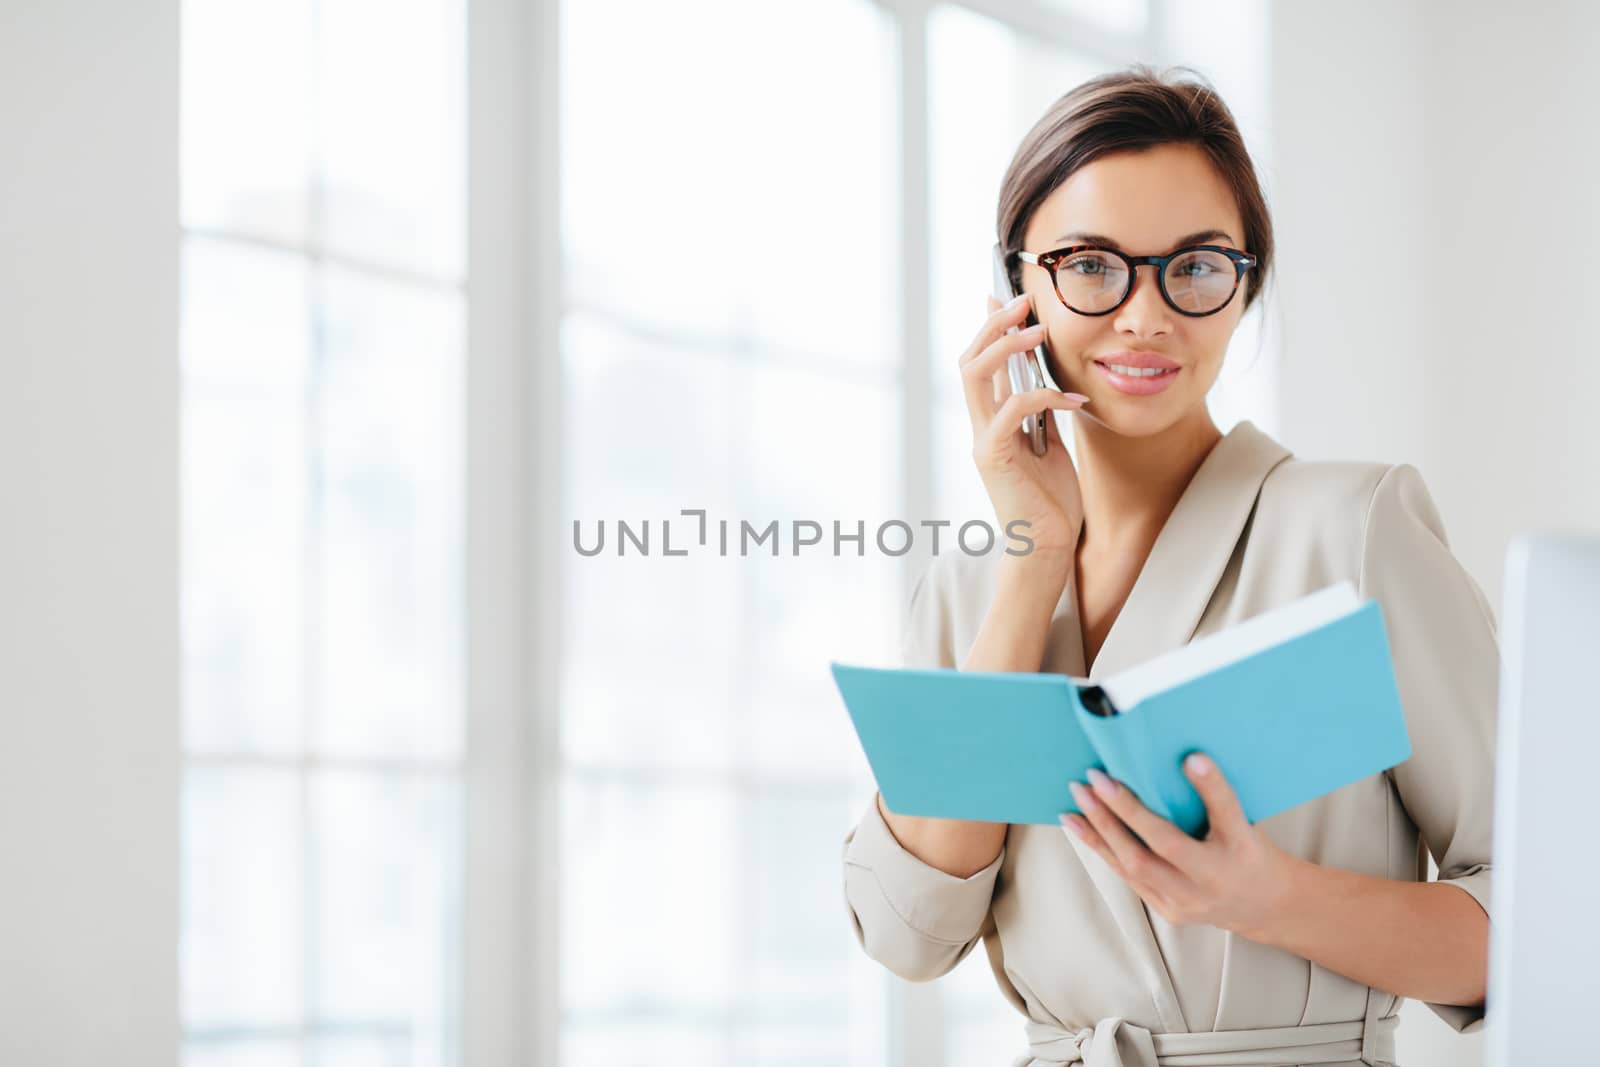 Photo of attractive woman with dark hair, has telephone conversation, agrees to meet with colleague, holds opened diary, wears glasses and formal suit, poses over white background plans daily schedule by vkstock